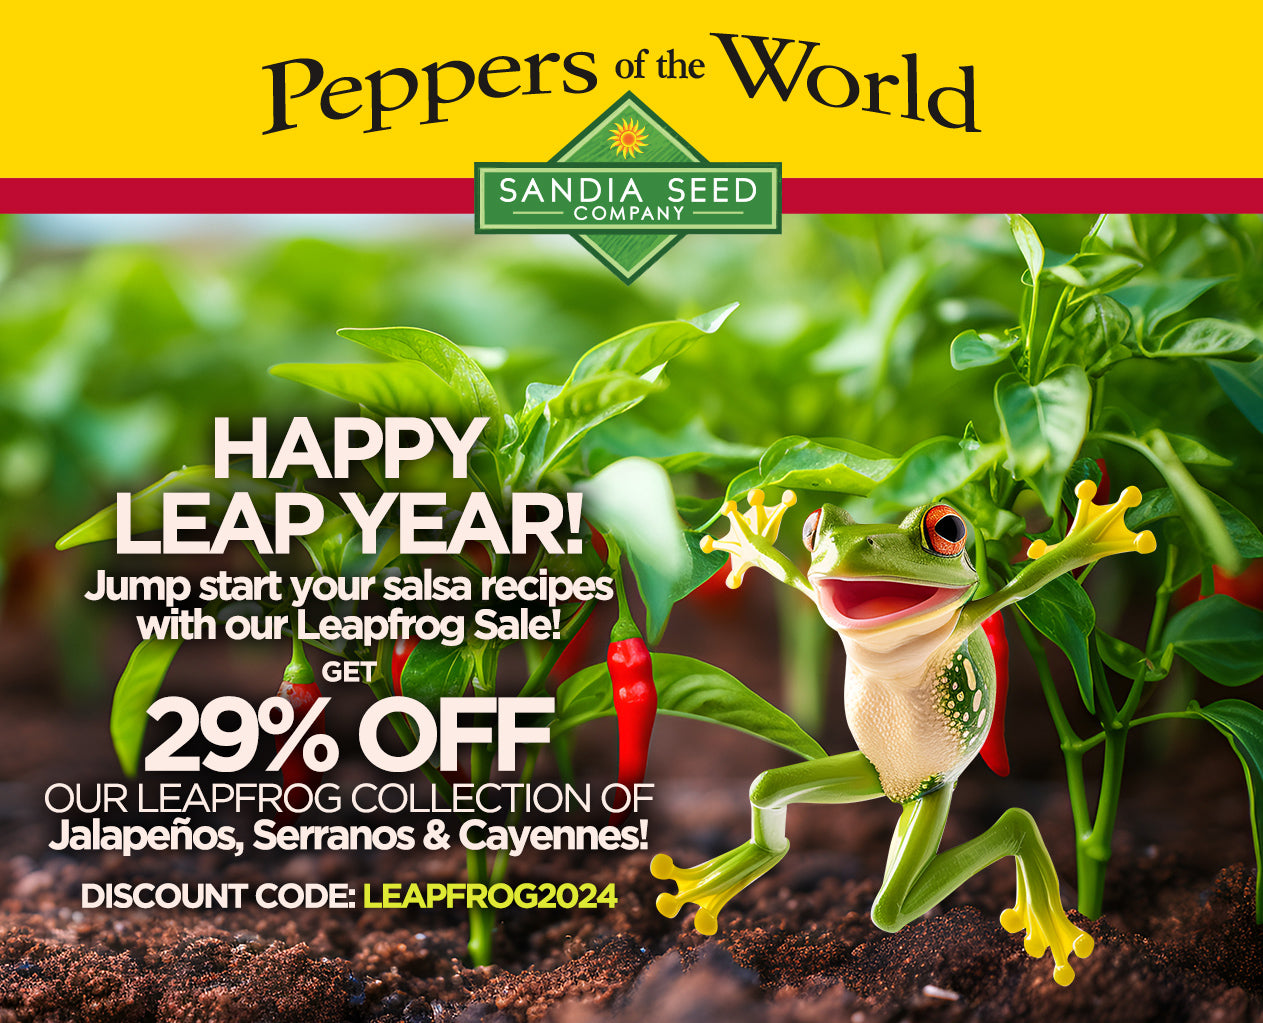 Leapfrog Sale for Leap Year - Get 29% off our Leapfrog collection of  Jalapeños, Serranos & Cayennes!